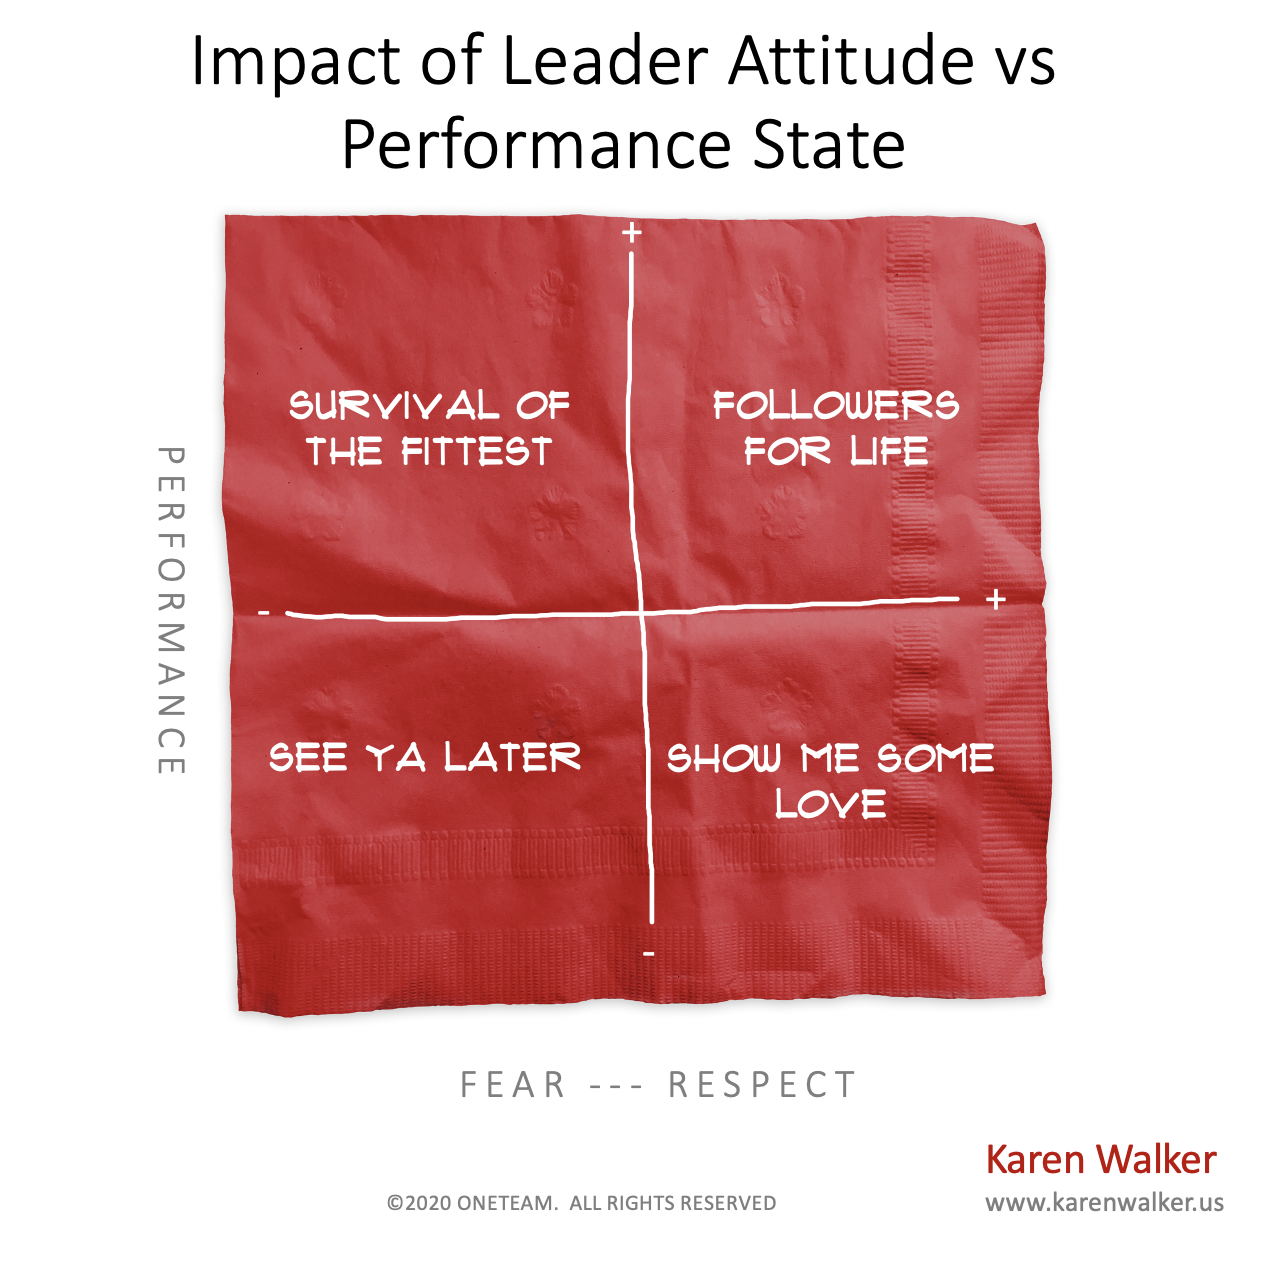 See Ya Later or Followers for Life? - Click for the two-minute video: The Impact of Leader Attitude